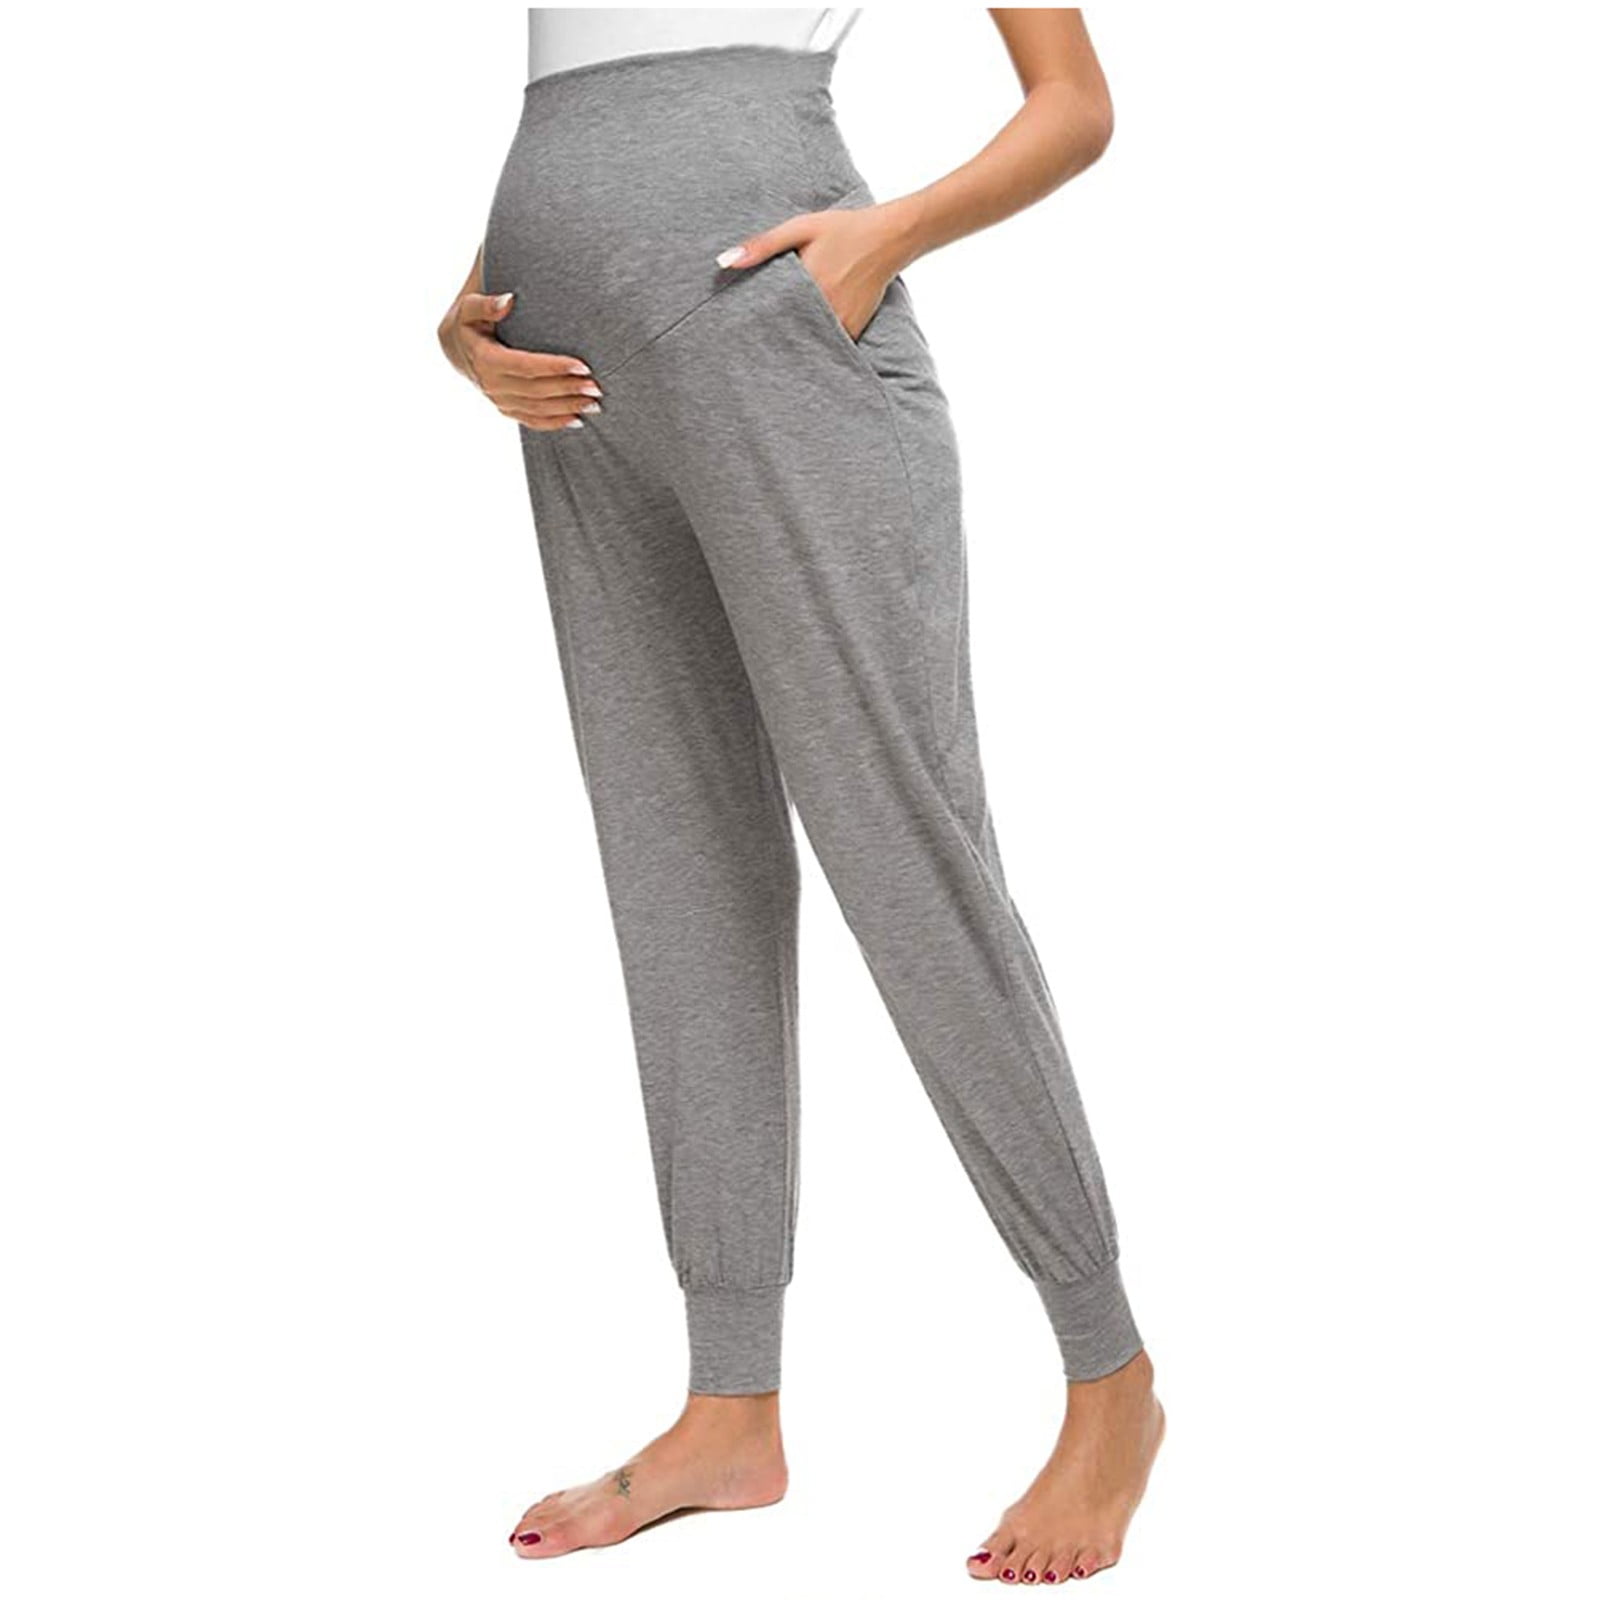 TUOBARR Maternity Clothes Maternity Women's Solid Color Casual Pants ...